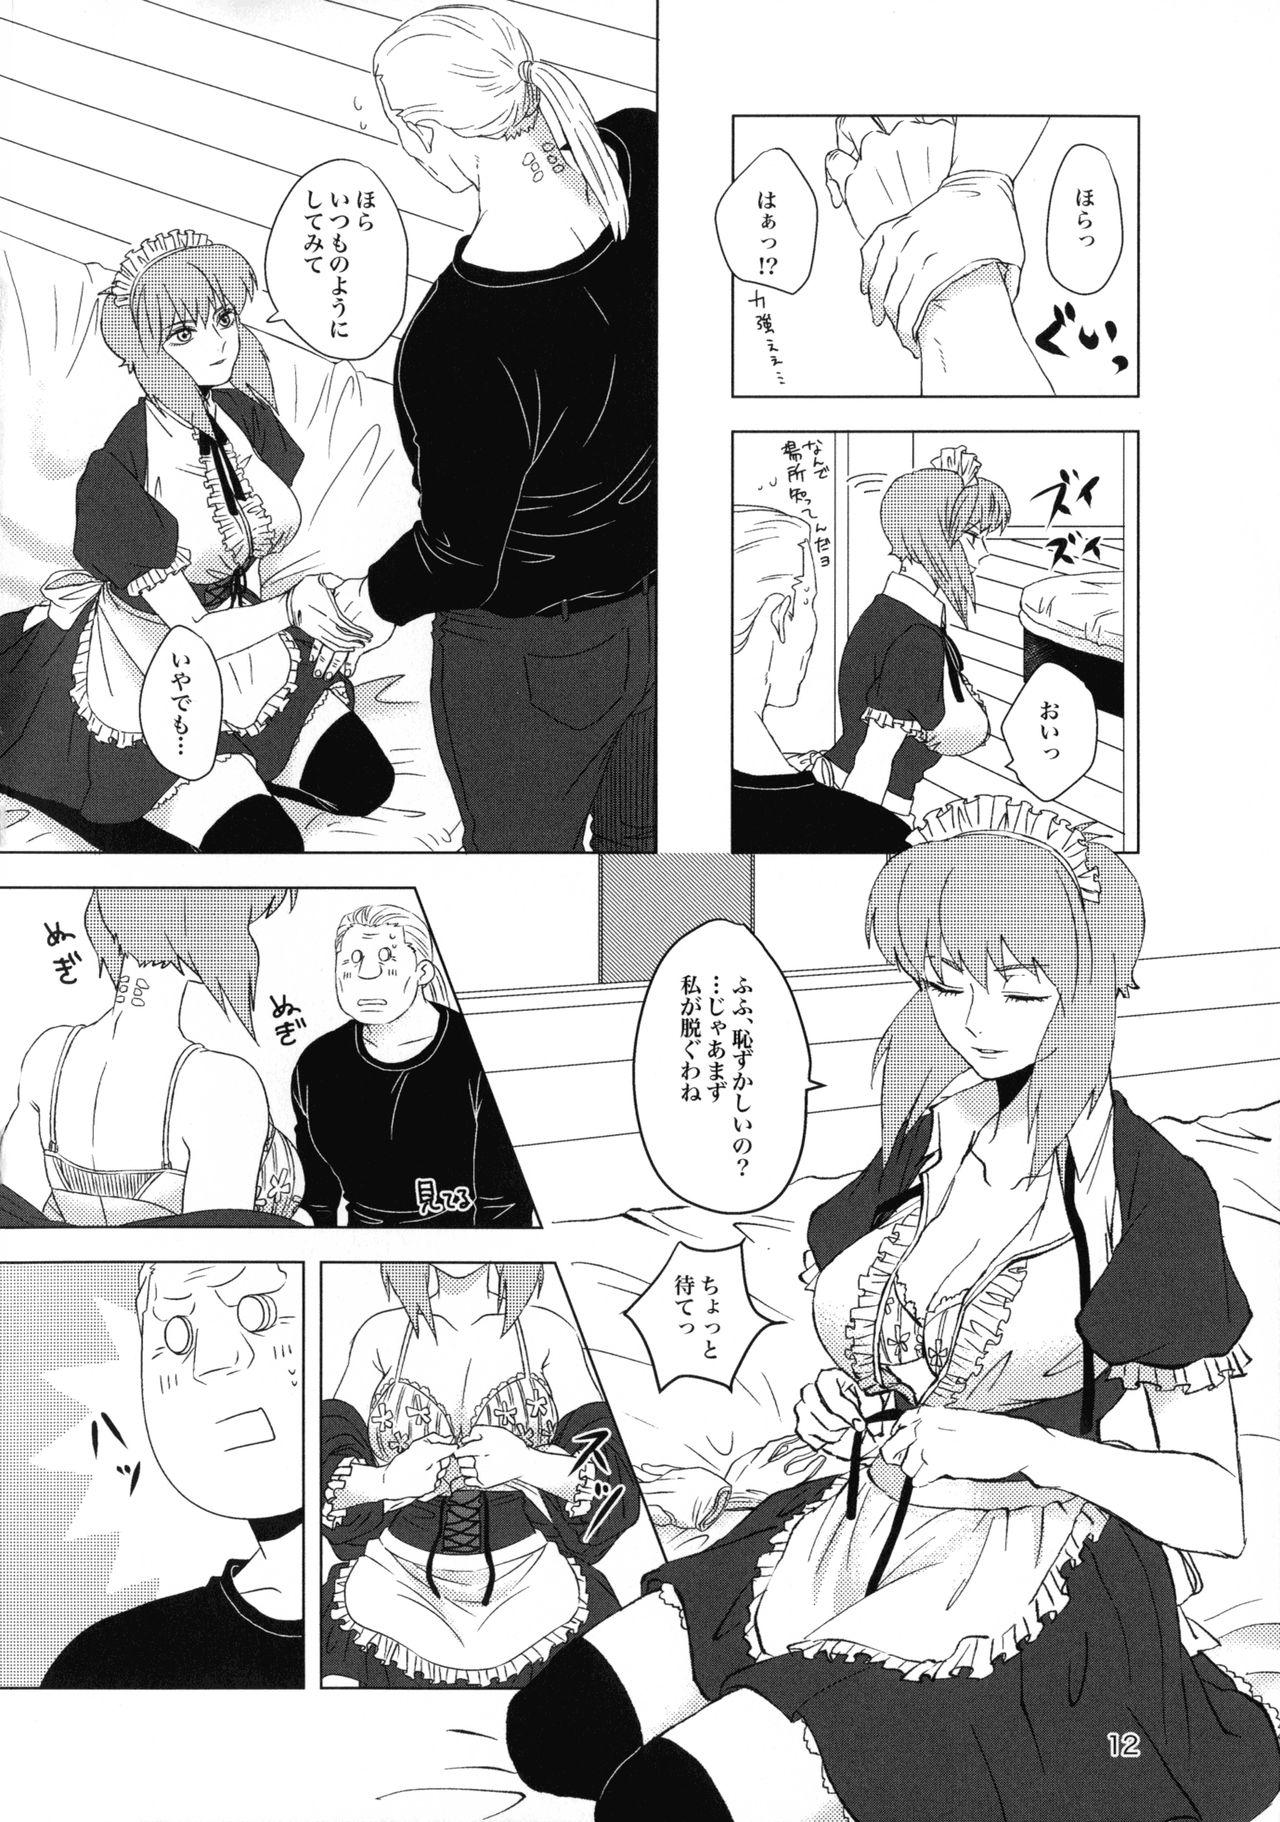 Soapy FRENCHMAIDCOSTUME BTMT - Ghost in the shell Chudai - Page 12